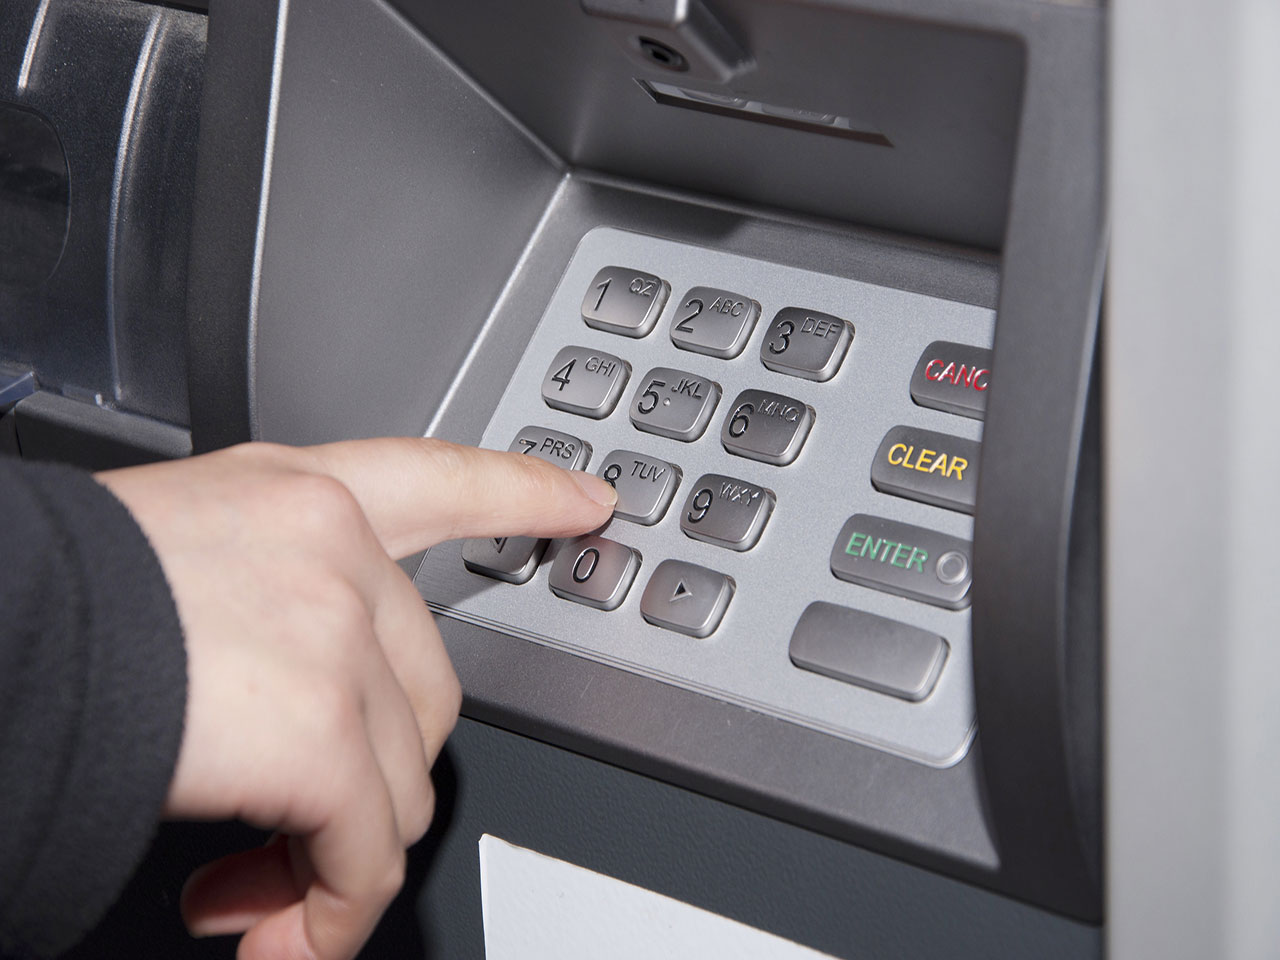 NRB directives for ensuring Nepali language option in ATM